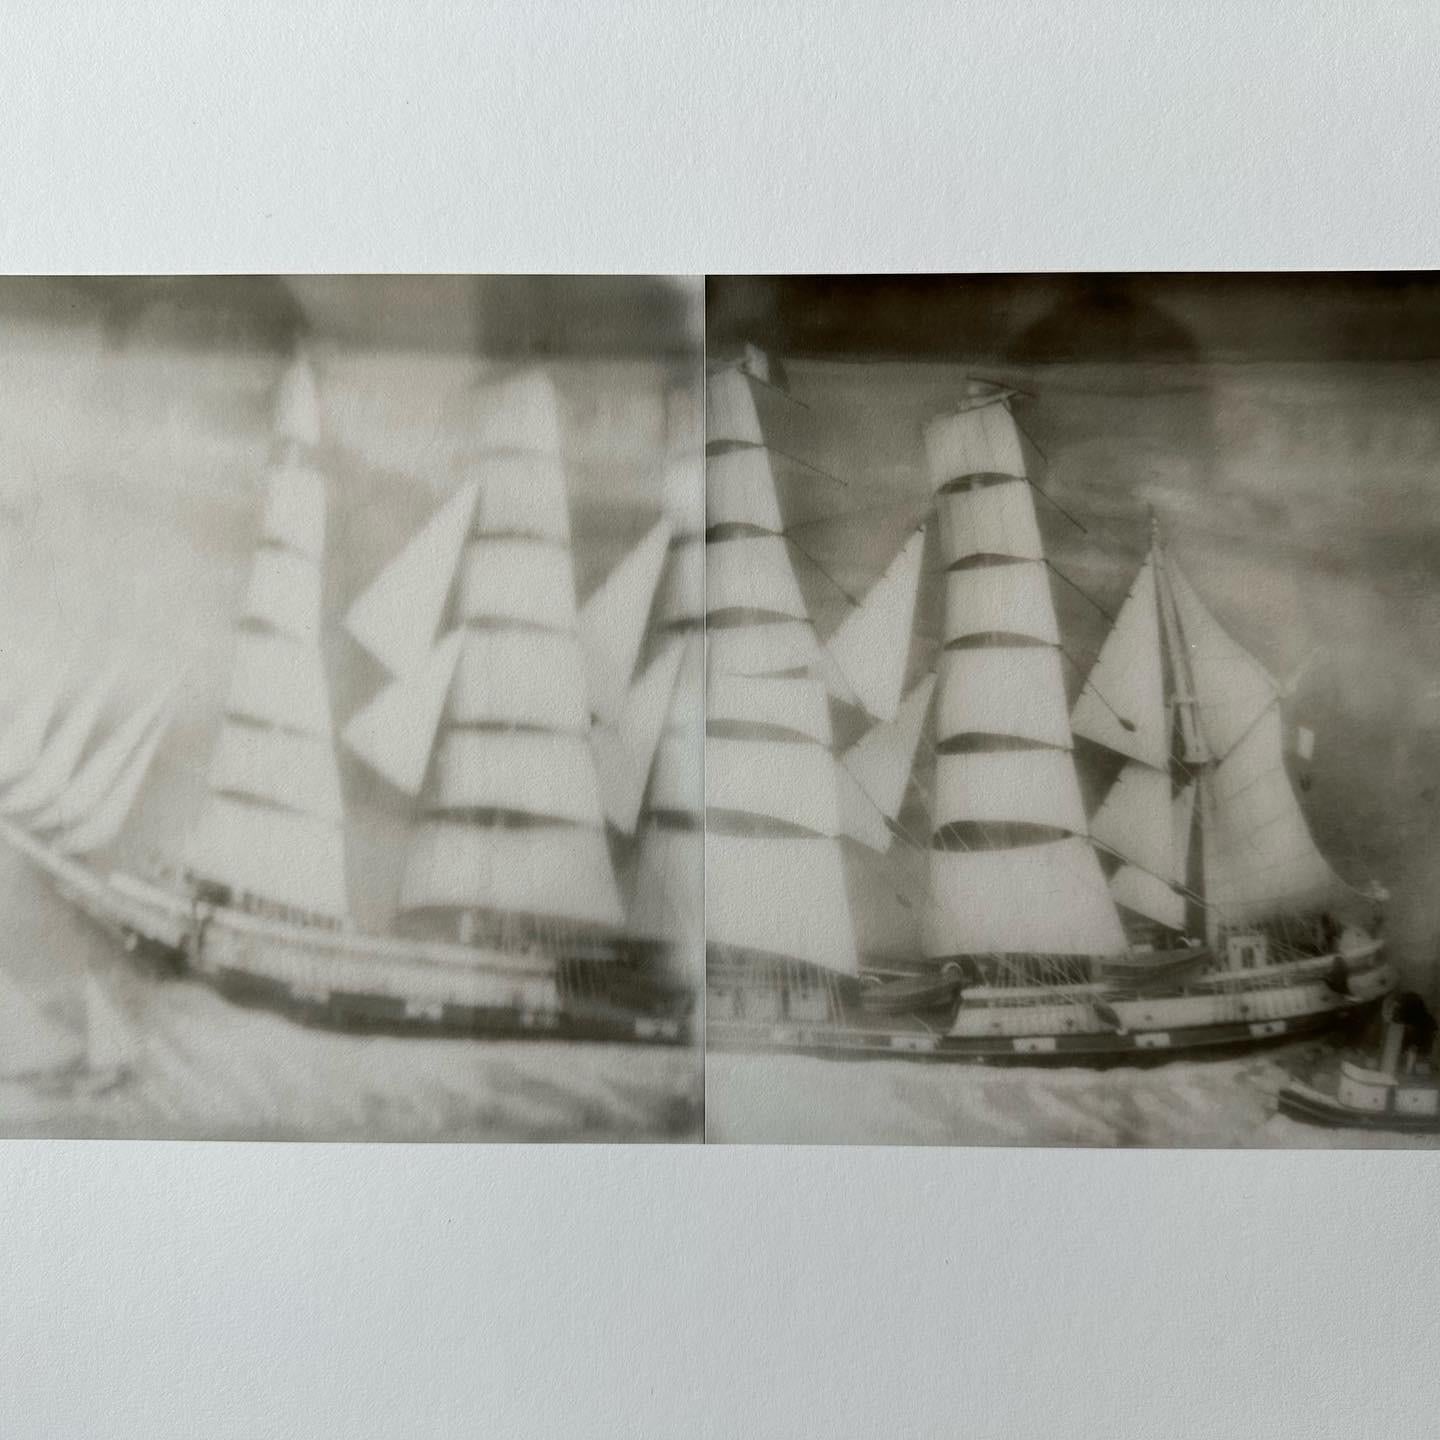 Ship, from the Chasing the Fog:Learning How to Breathe Series